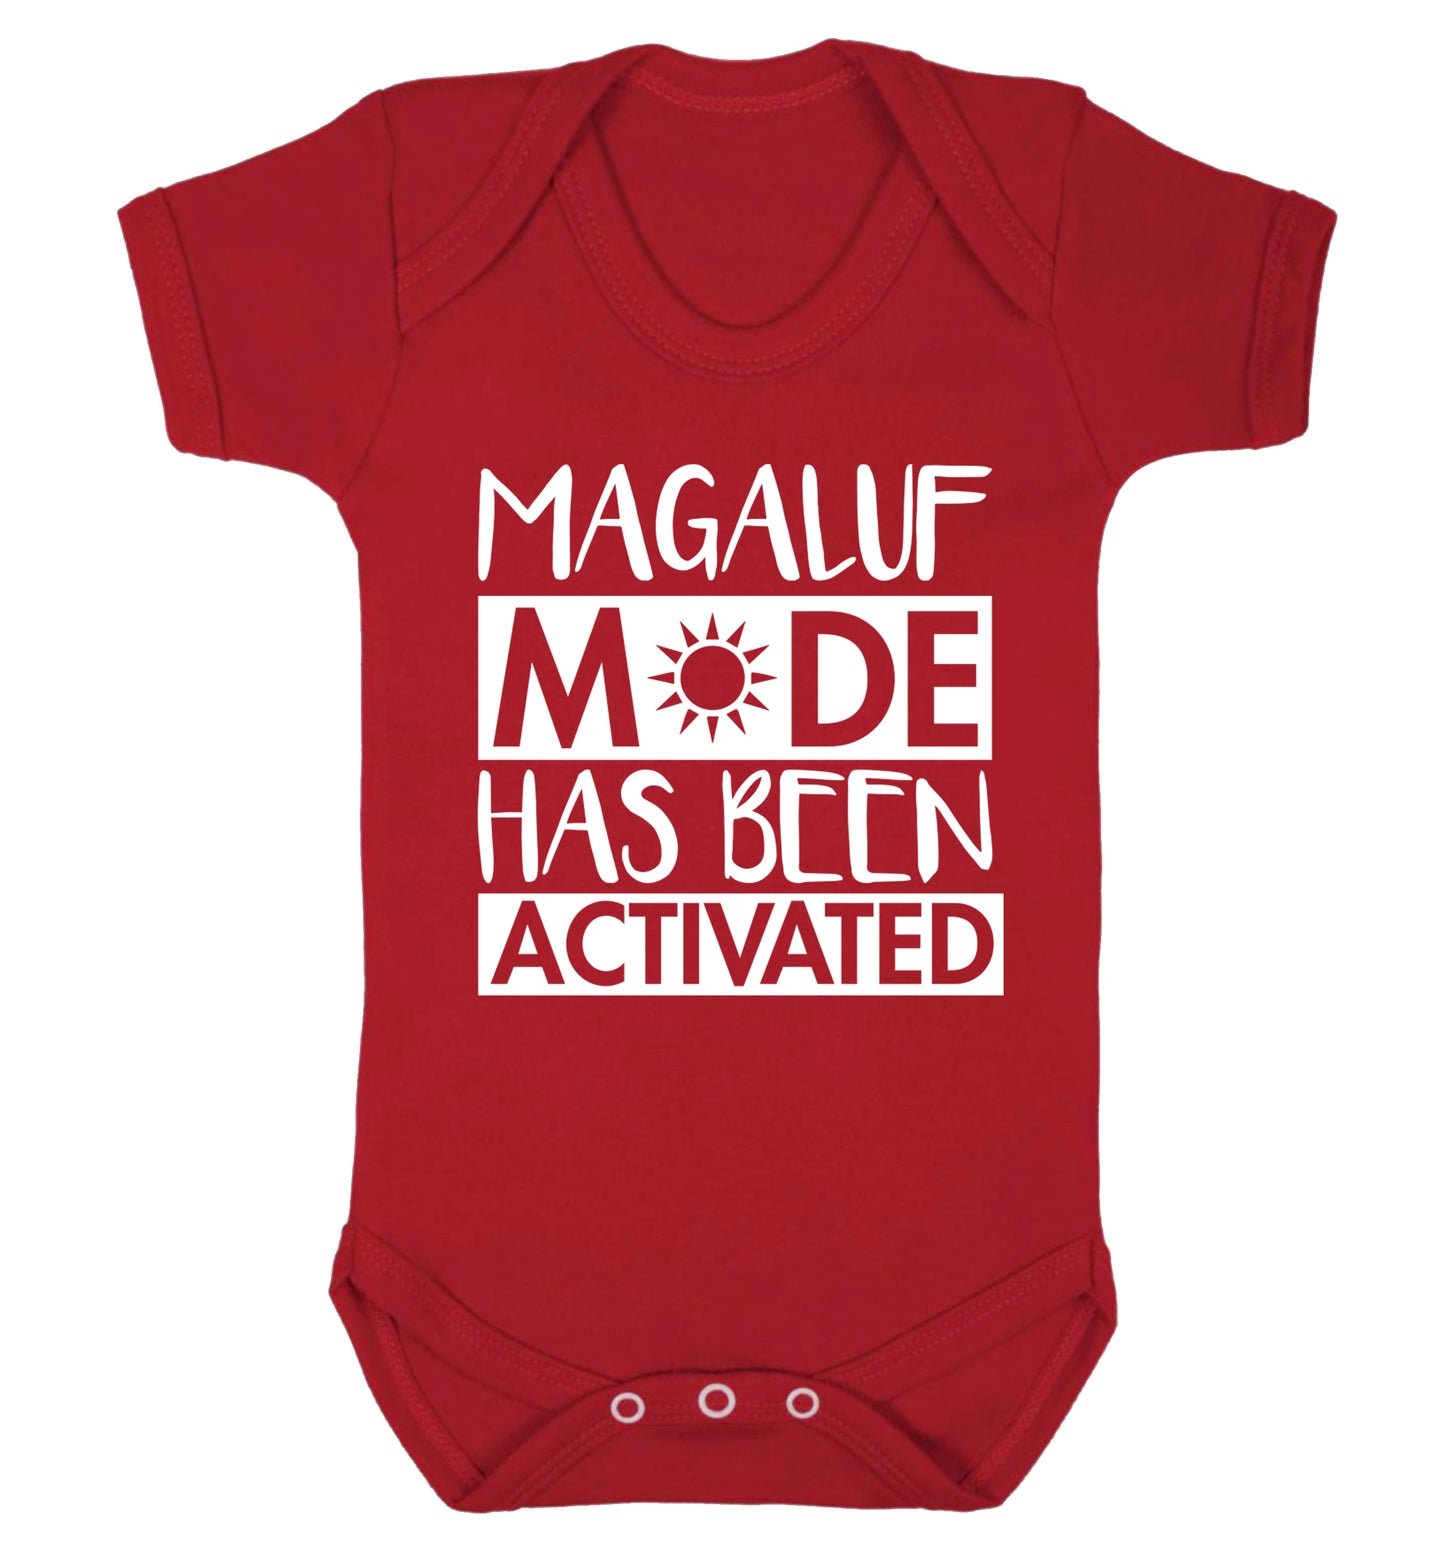 Magaluf mode has been activated Baby Vest red 18-24 months